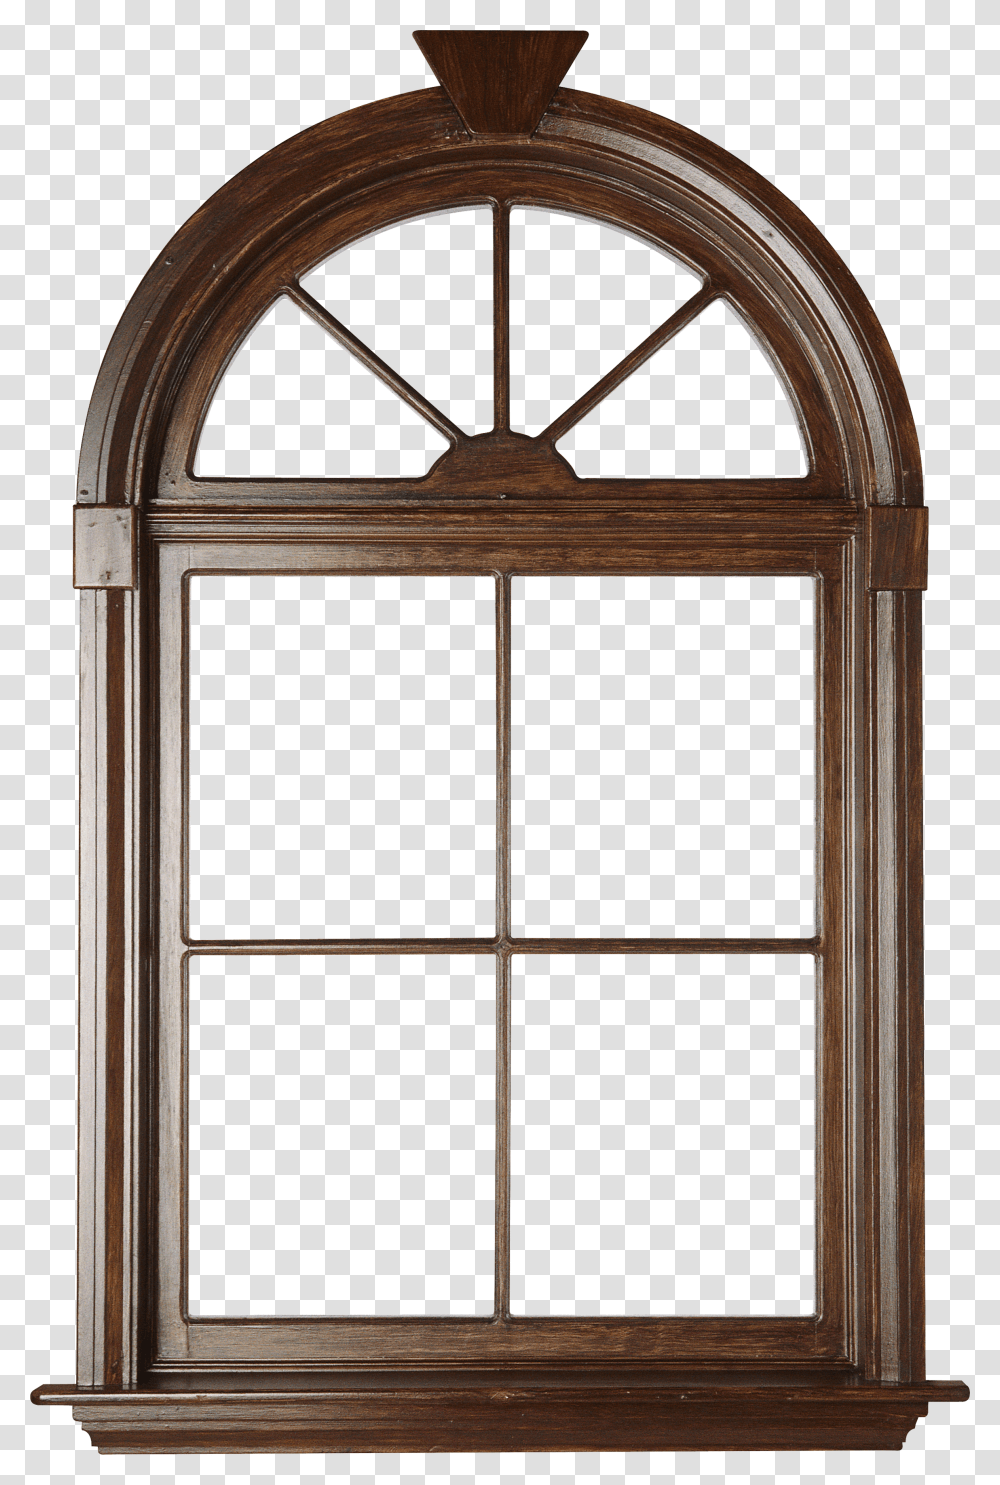 Window Images Free Download Open Window Window Background Transparent Png